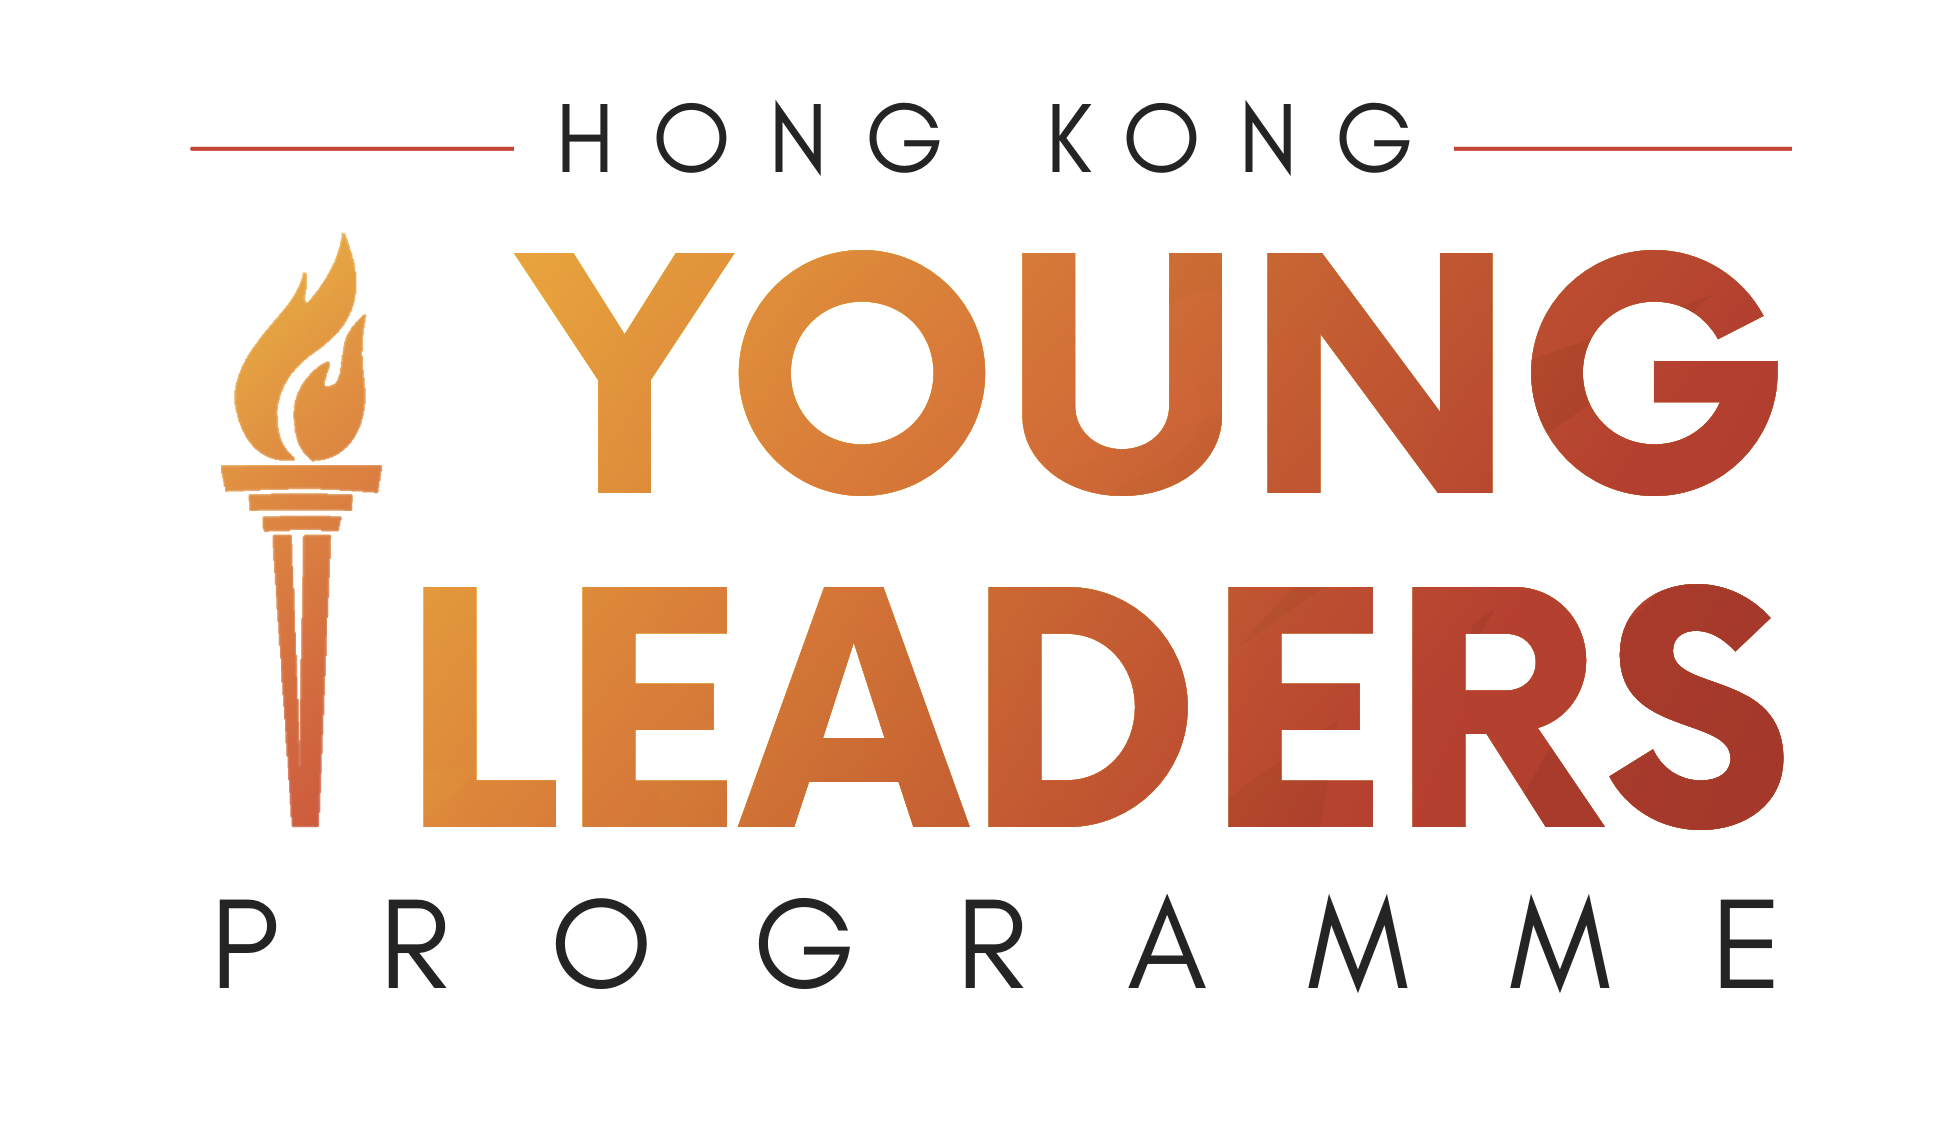 The Young Leaders Programme